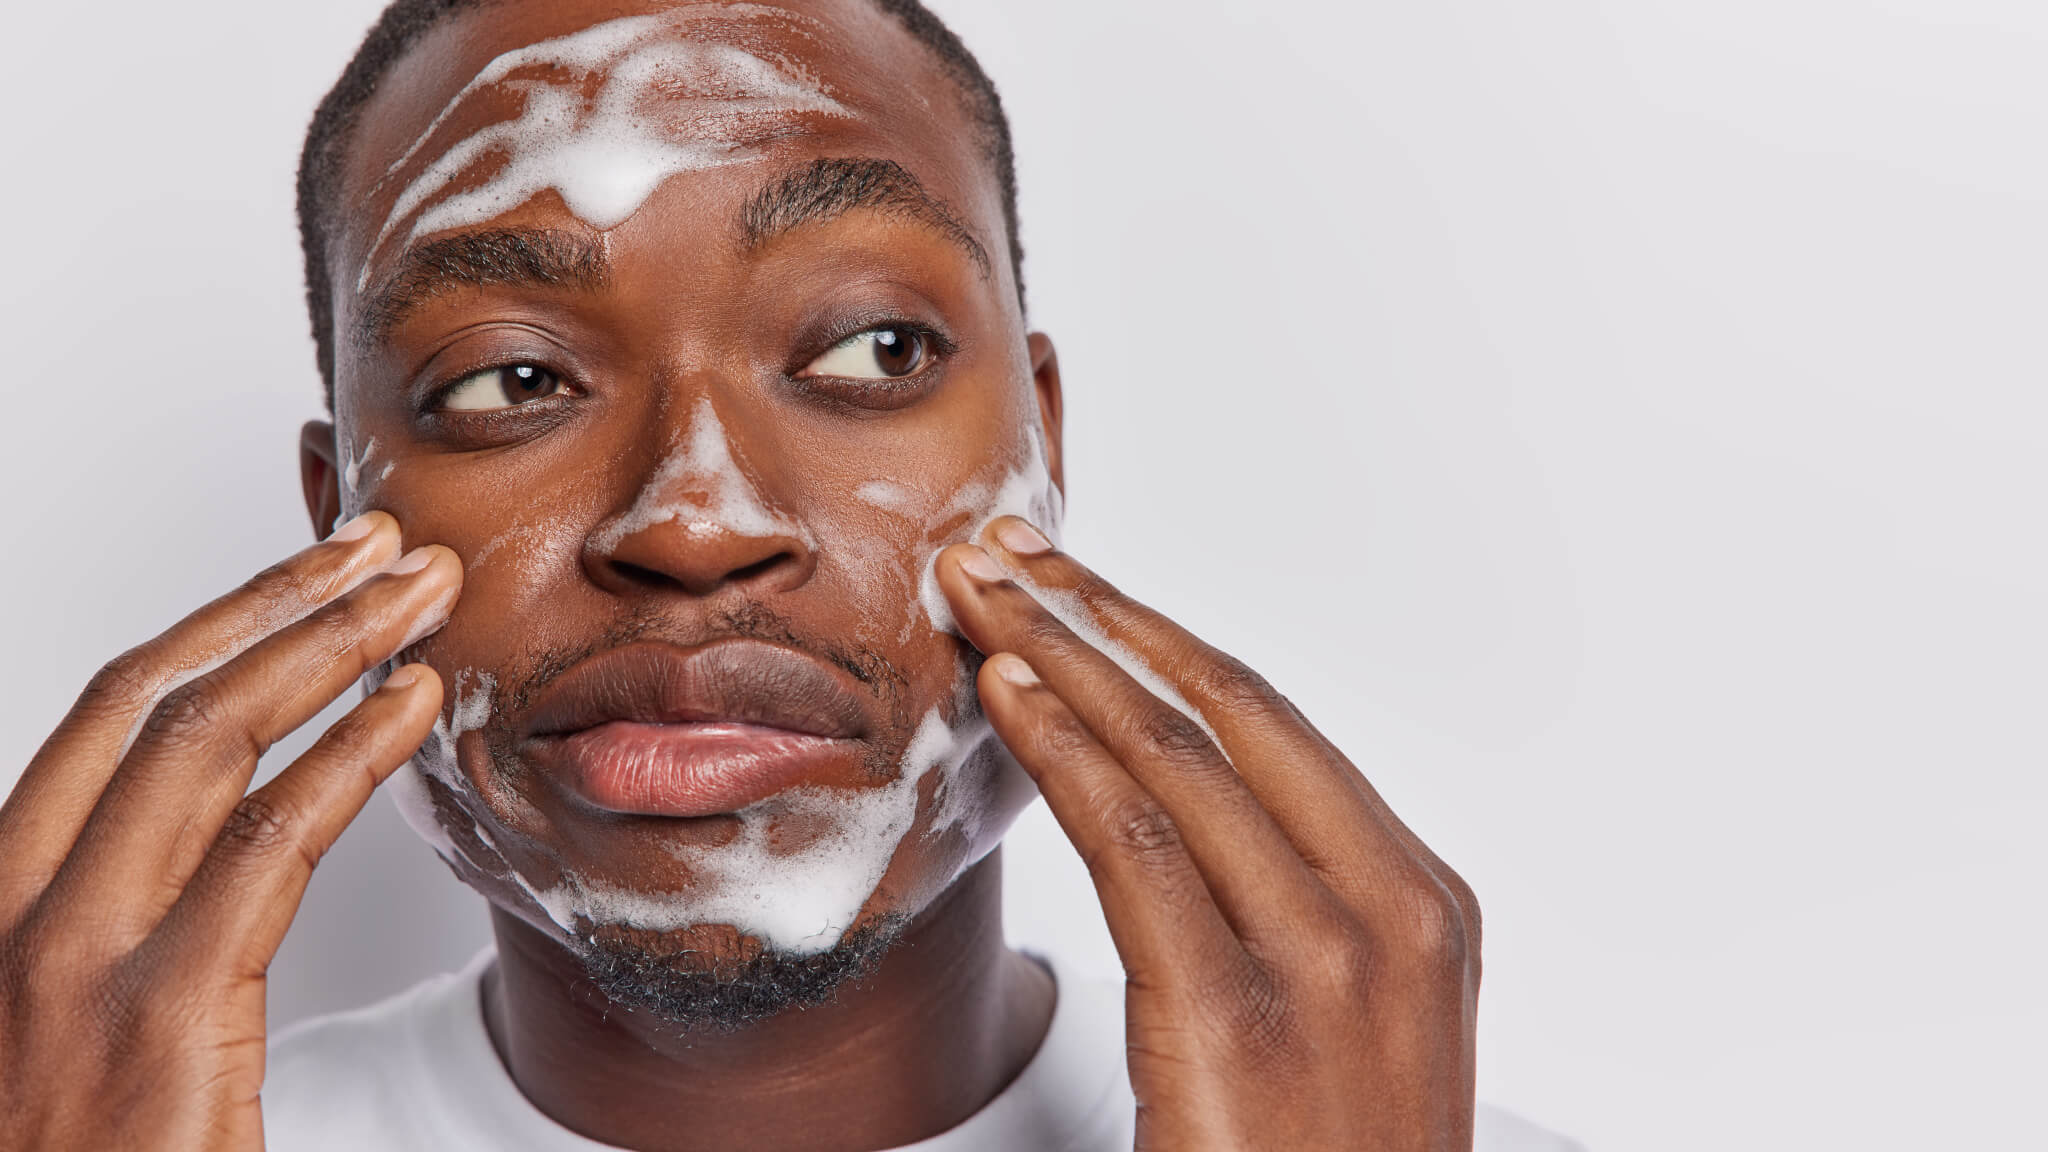 Black man cleansing and washing his face with soap